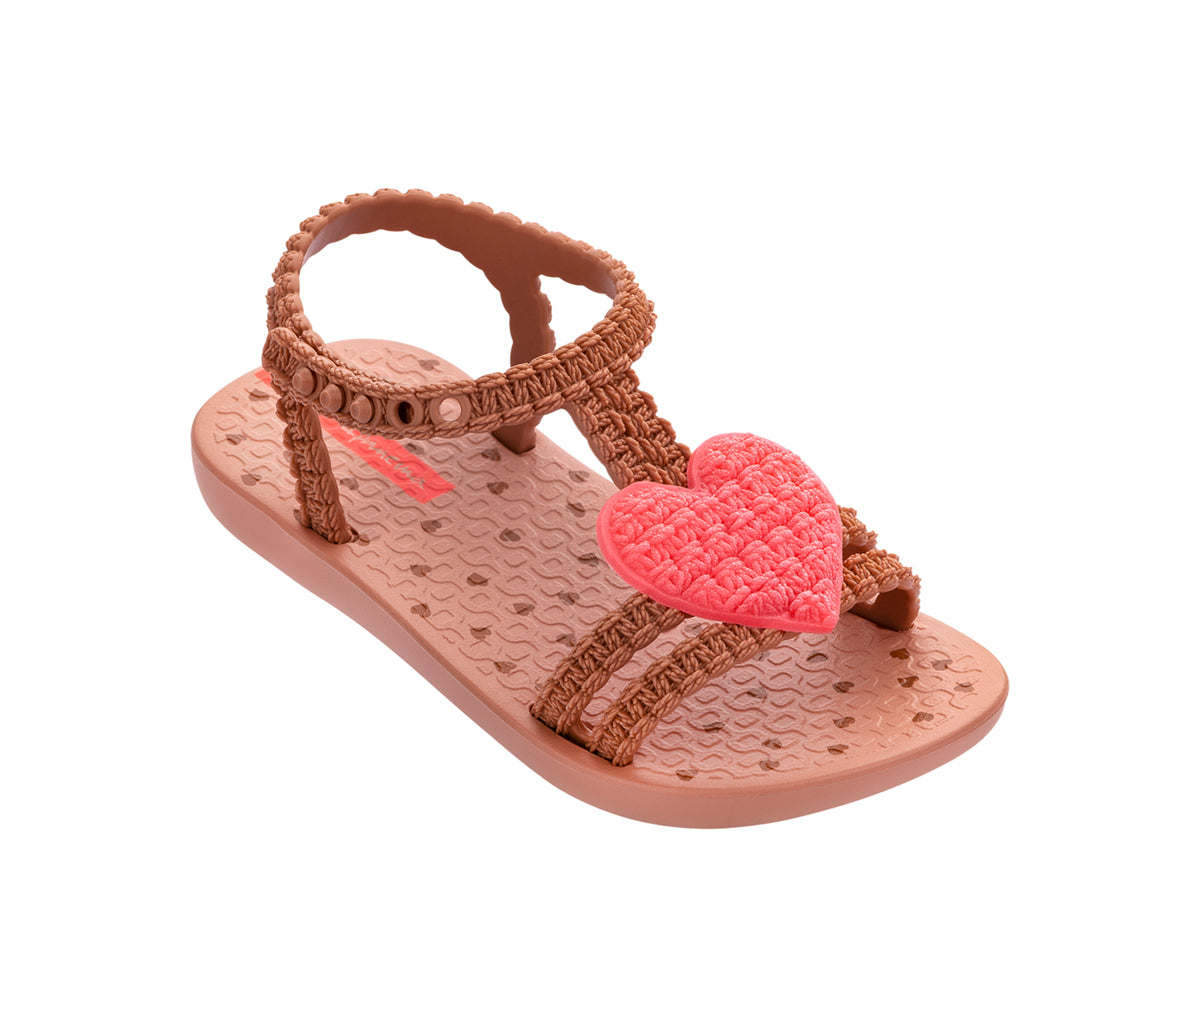 Angled view of a beige My First Ipanema Sandal with straps and a crochet pink heart on top.